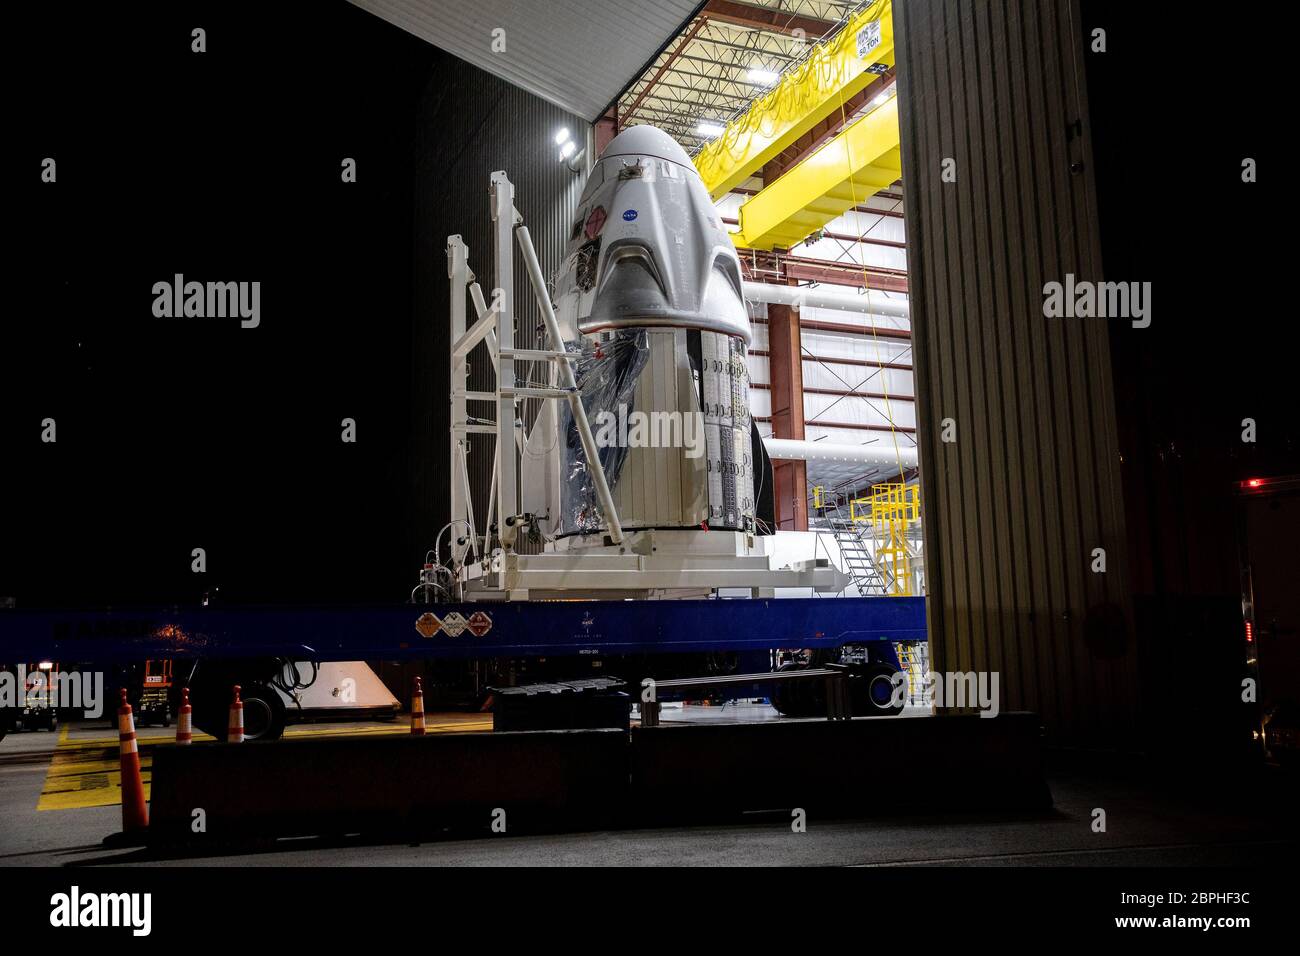 The SpaceX Crew Dragon spacecraft arrives at Launch Complex 39A at NASA's Kennedy Space Center in Florida, transported from the company's processing facility at Cape Canaveral Air Force Station on Friday, May 15, 2020, in preparation for the Demo-2 flight test with NASA astronauts Robert Behnken and Douglas Hurley to the International Space Station for NASA's Commercial Crew Program. Crew Dragon will carry Behnken and Hurley atop a SpaceX Falcon 9 rocket, returning crew launches to the space station from U.S. soil for the first time since the Space Shuttle Program ended in 2011. NASA Photo by Stock Photo